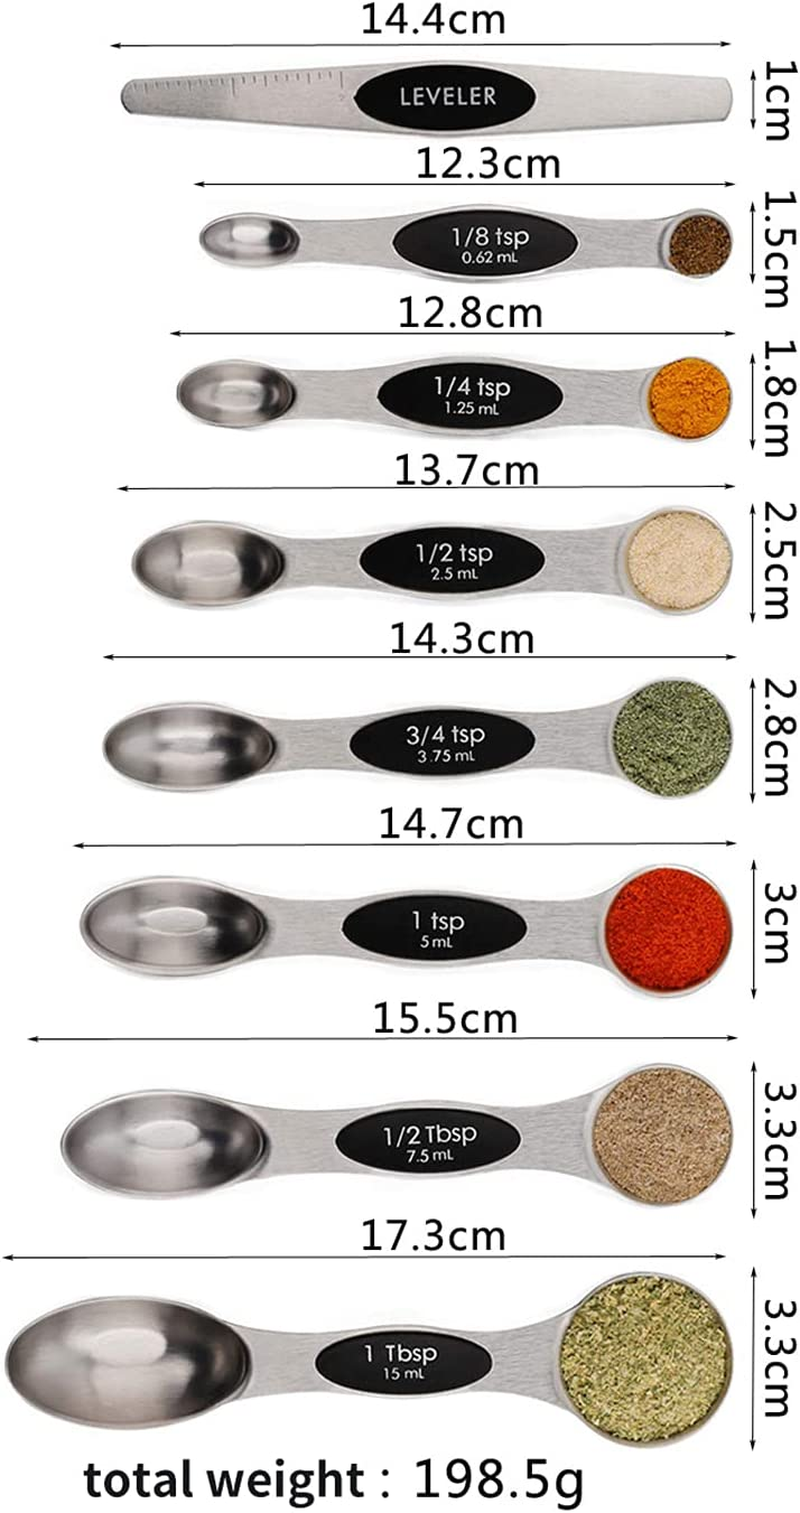 Set of 8 Magnetic Measuring Spoons, Double-Headed Kitchen Spoons - Stackable